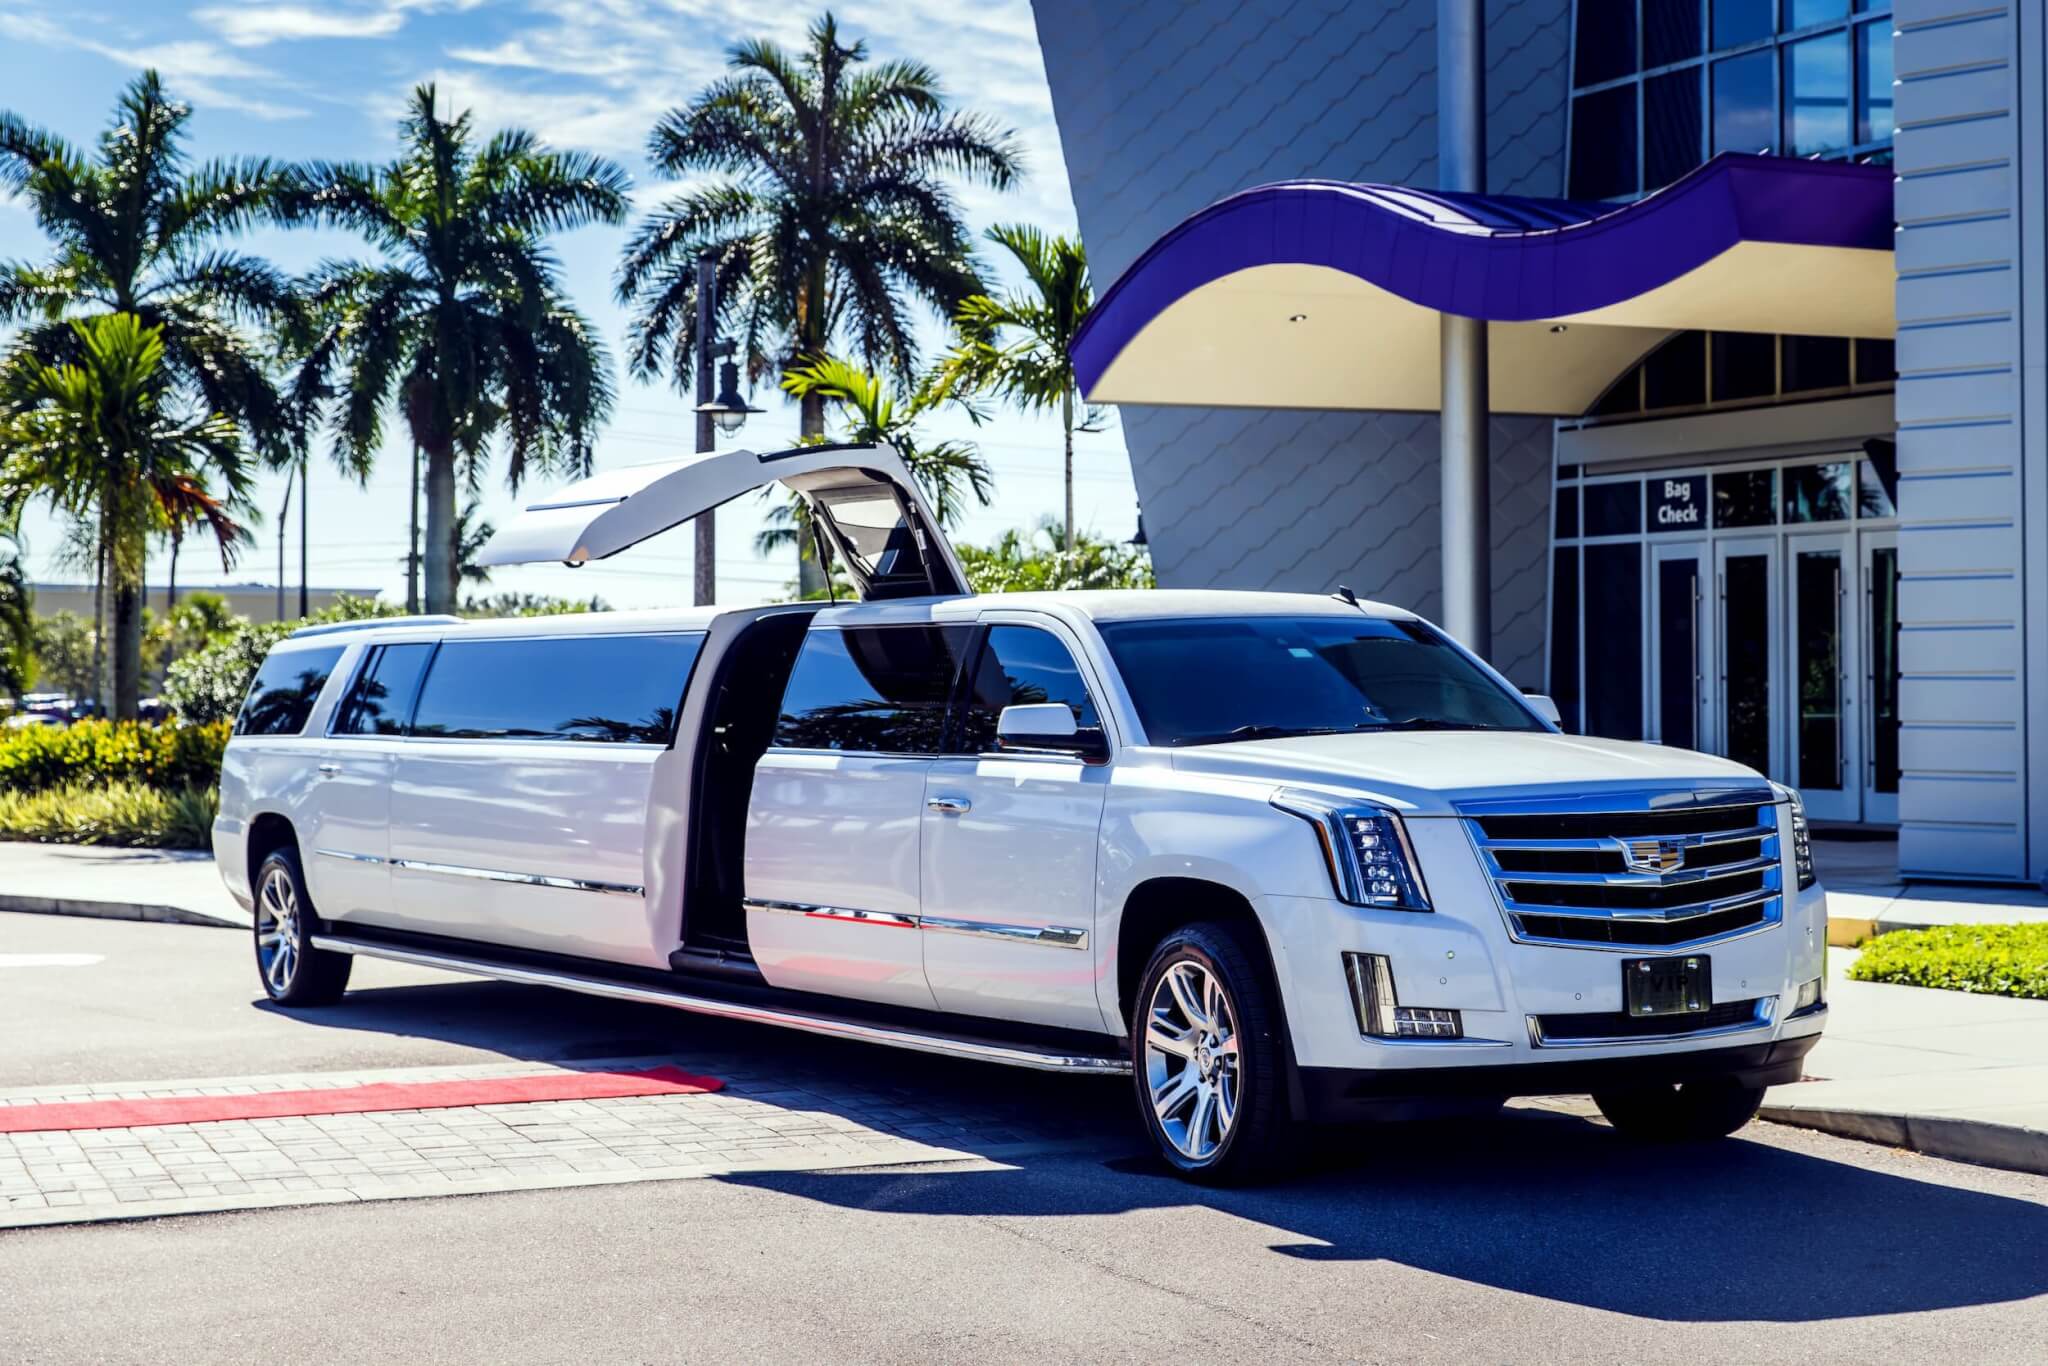 The Do’s and Don’ts of Using a Limo Service